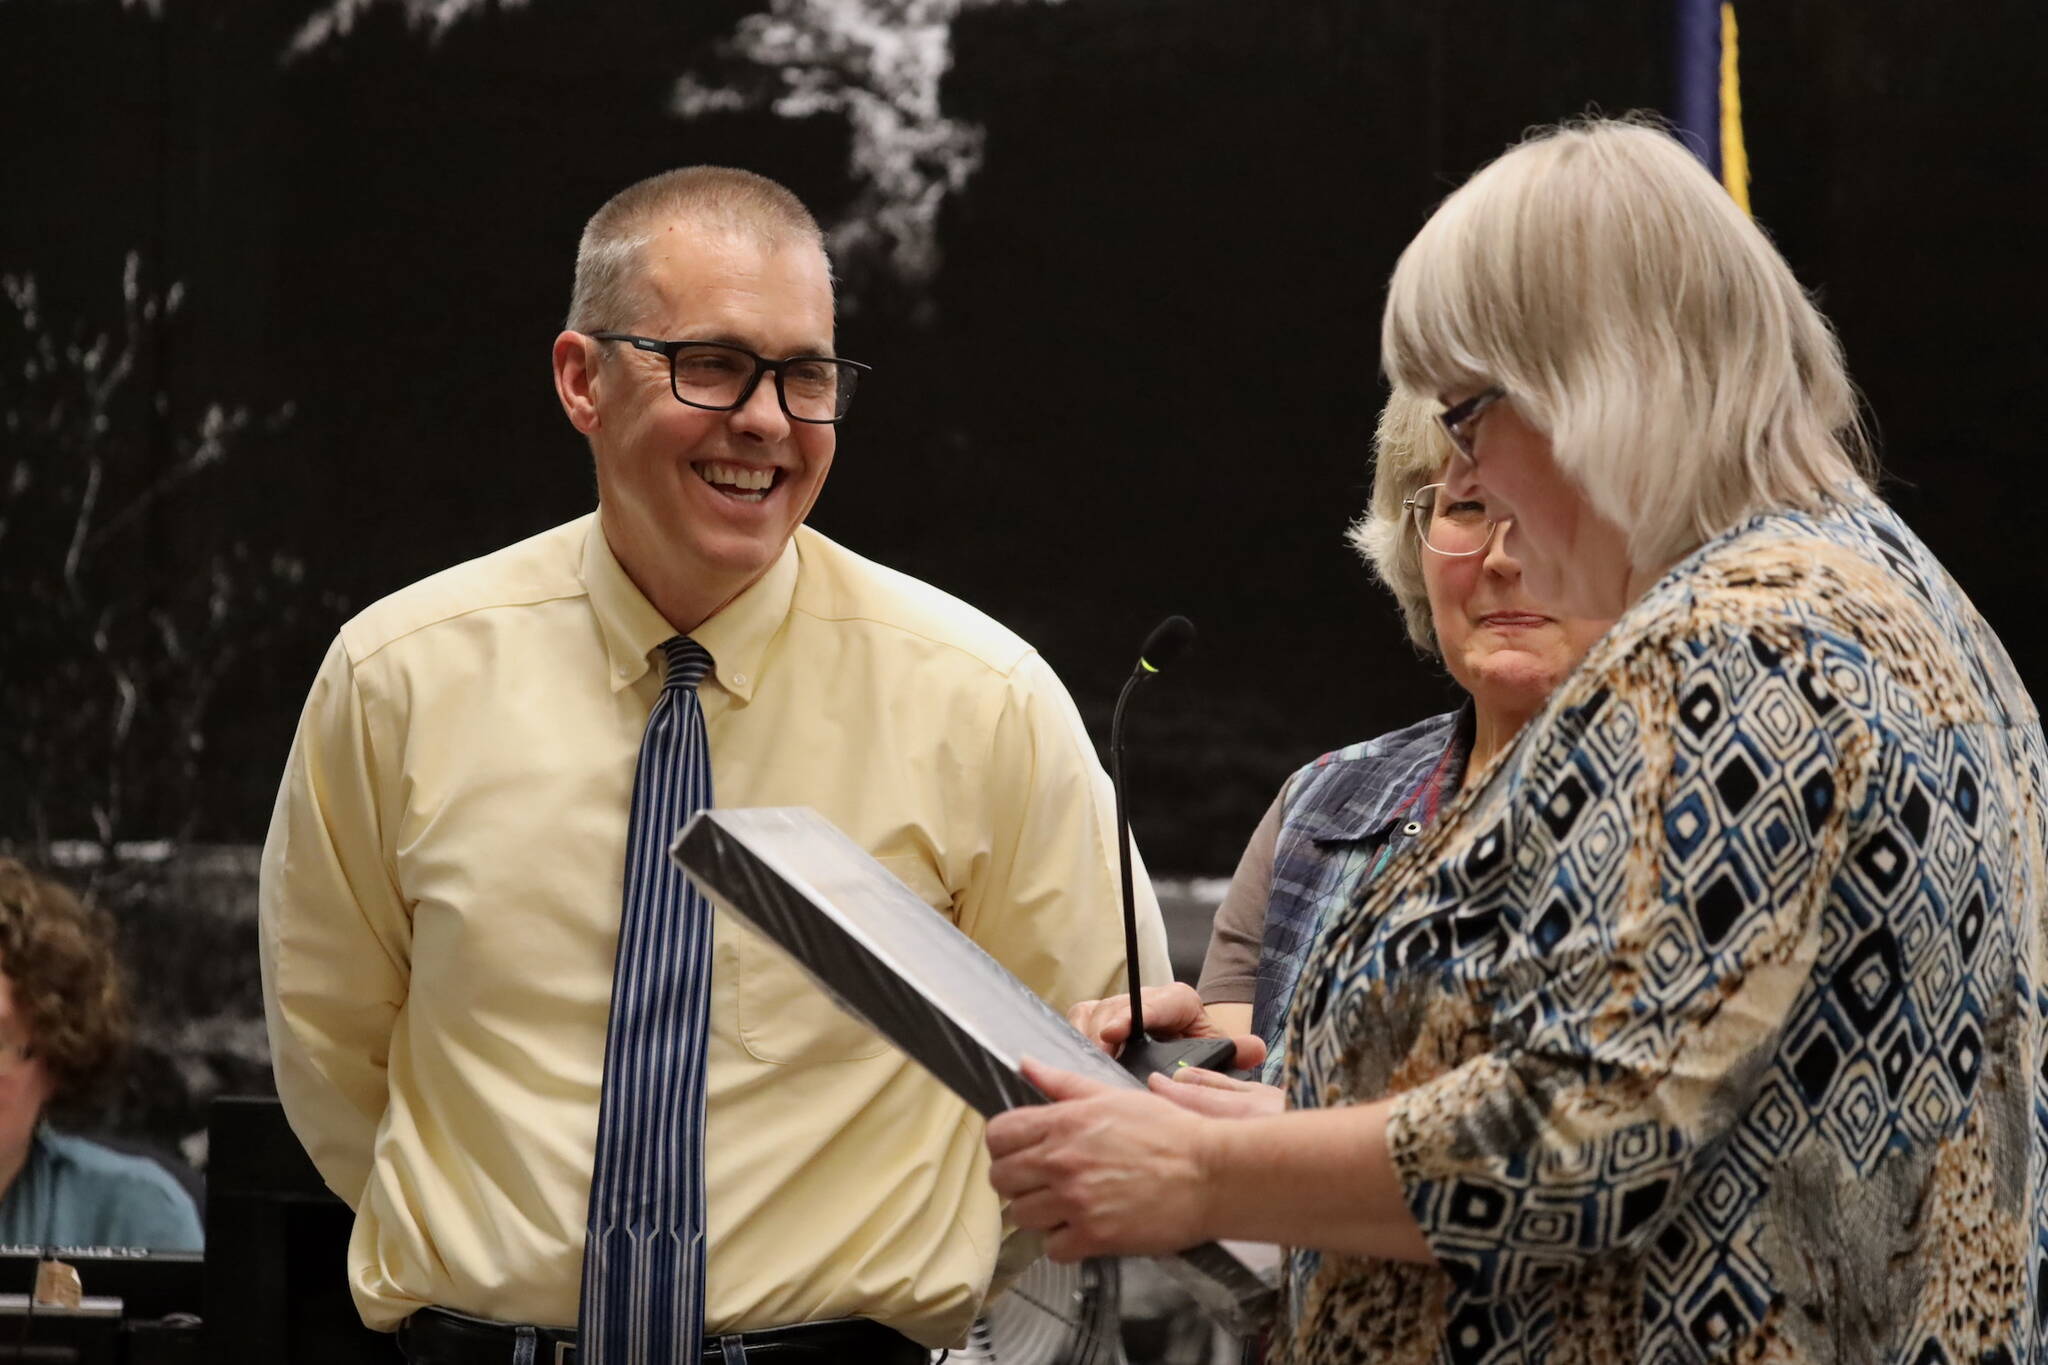 Retiring City and Borough of Juneau Manager Rorie Watt (right) smiles as Mayor Beth Weldon reads a proclamation Monday night honoring him for his time as manager. (Clarise Larson / Juneau Empire)